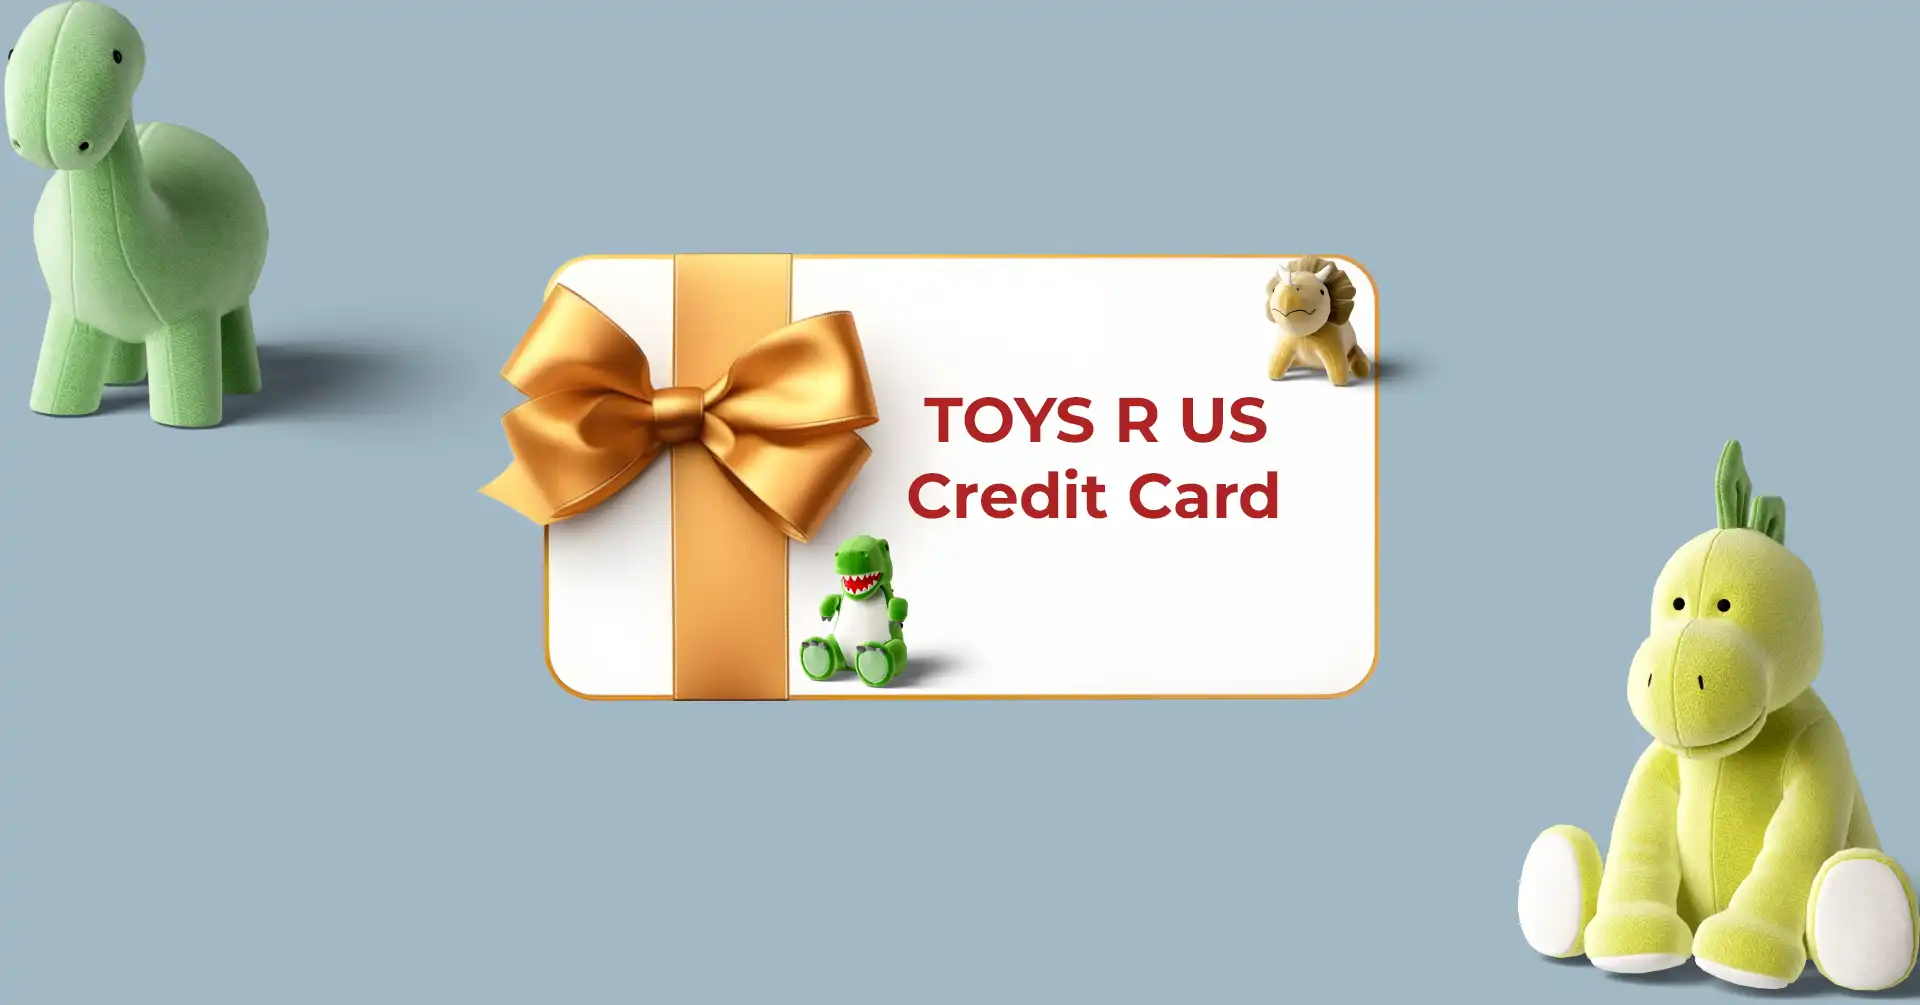 Toys R Us Credit Card Pro Tips For